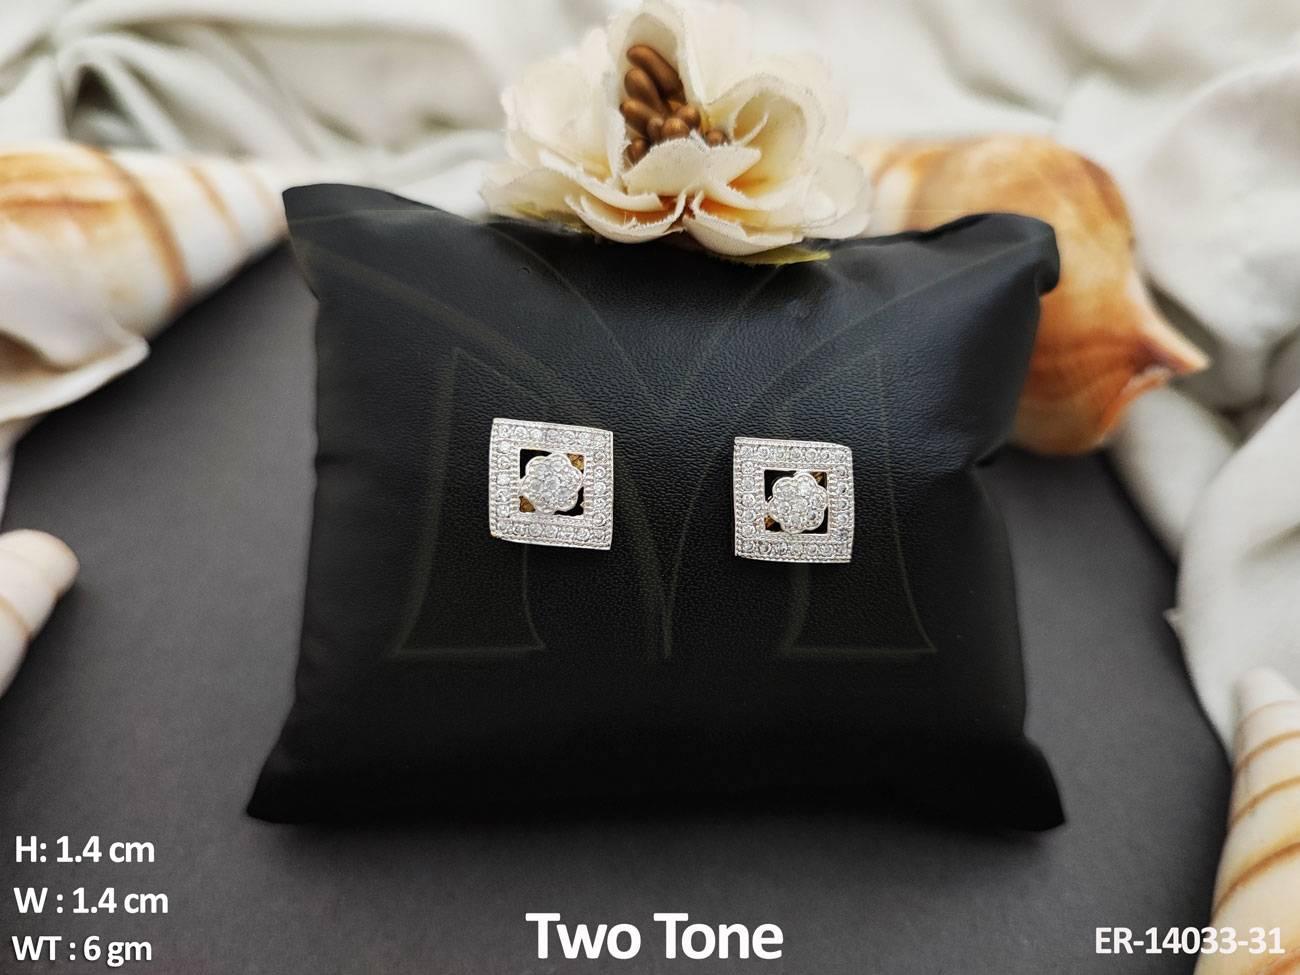 These unique Square Shape Flower Design Two Tone Polish AD Tops Studs Earrings add a touch of elegance to any outfit.